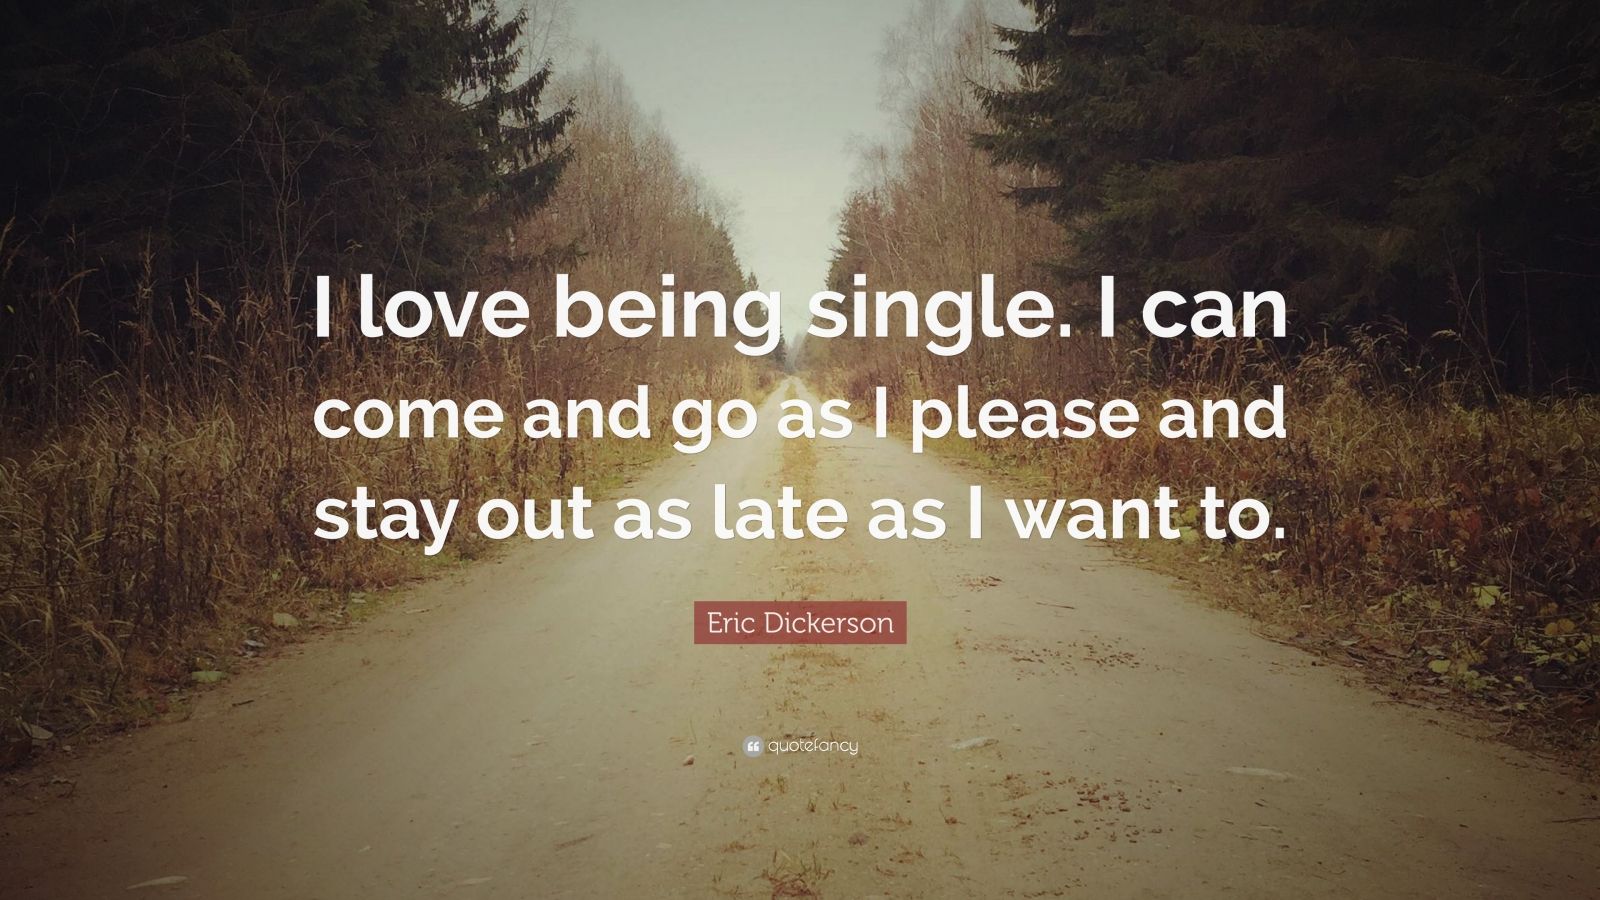 Eric Dickerson Quote: "I love being single. I can come and ...